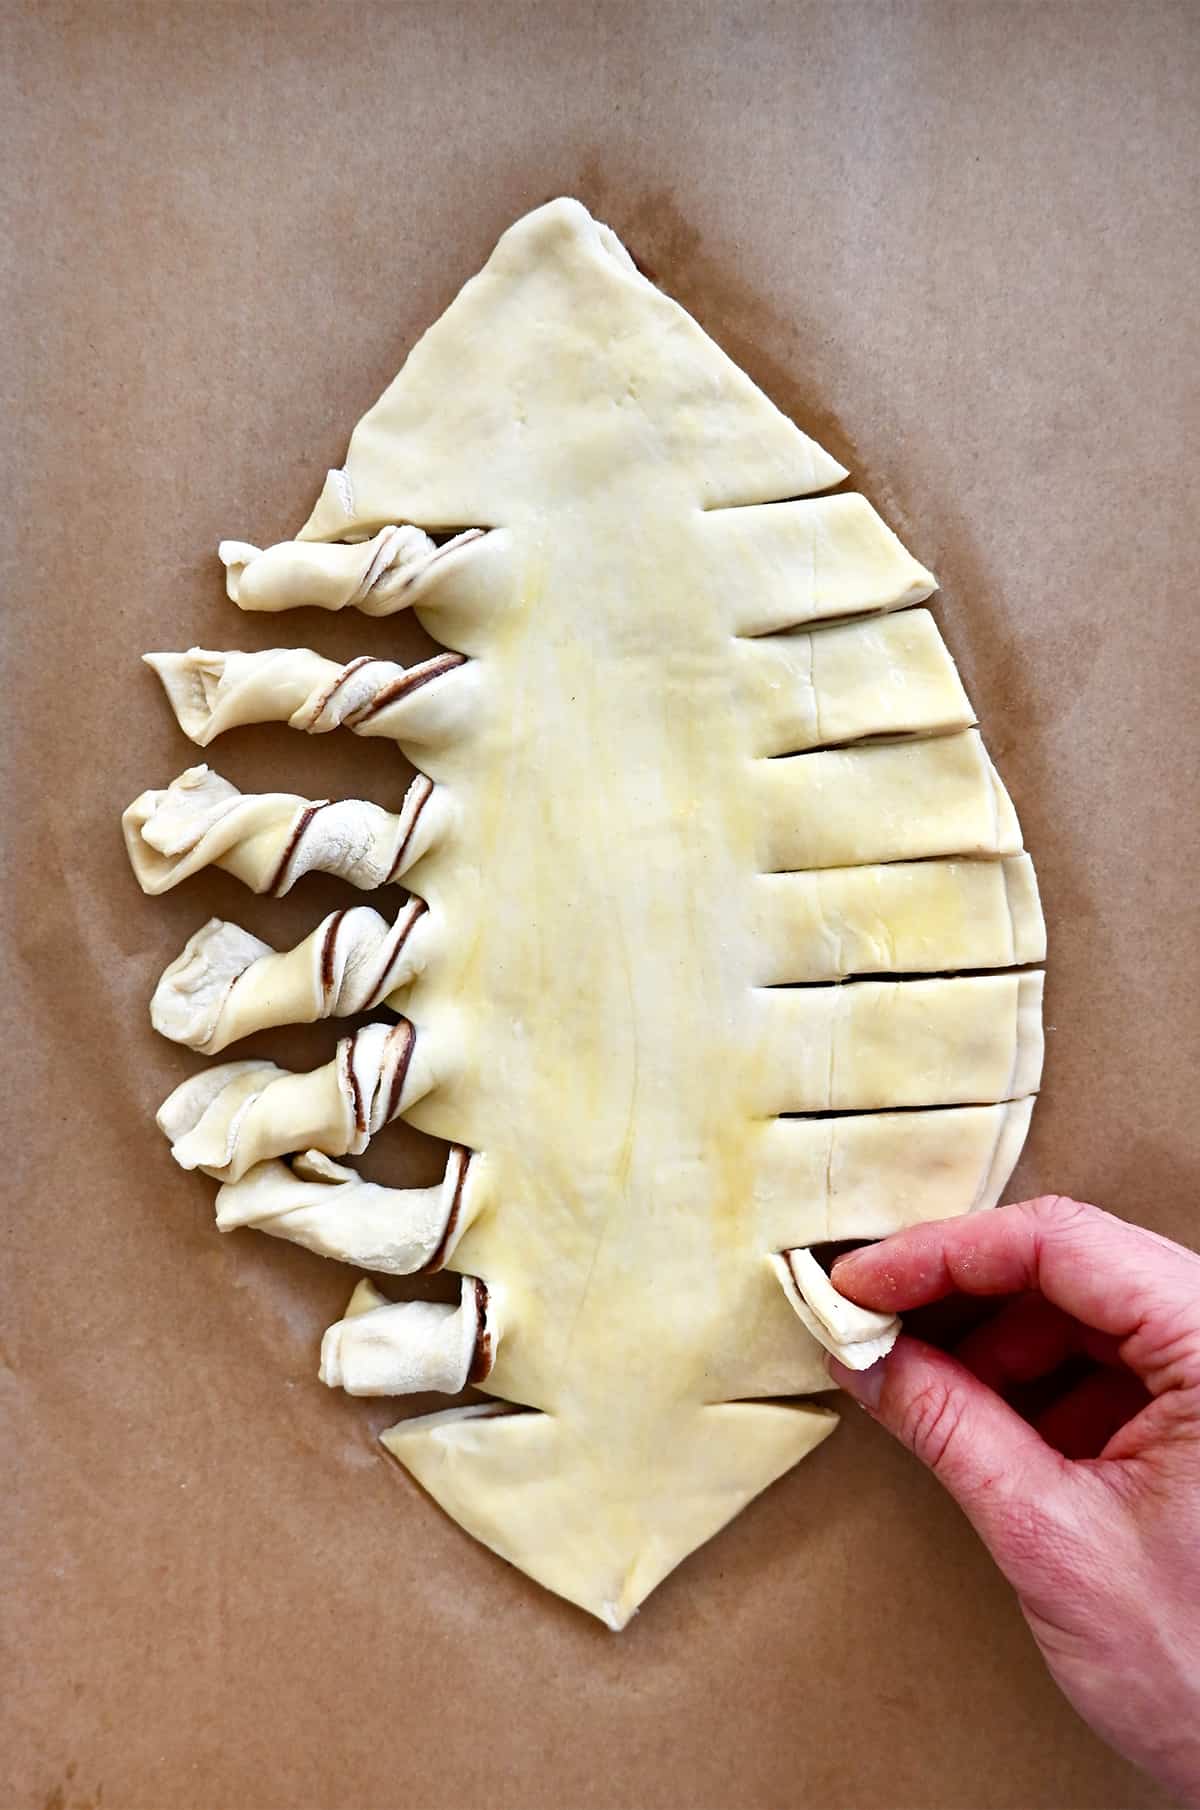 Puff pastry in the shape of a football with twisted edges on a parchment paper-lined baking sheet.